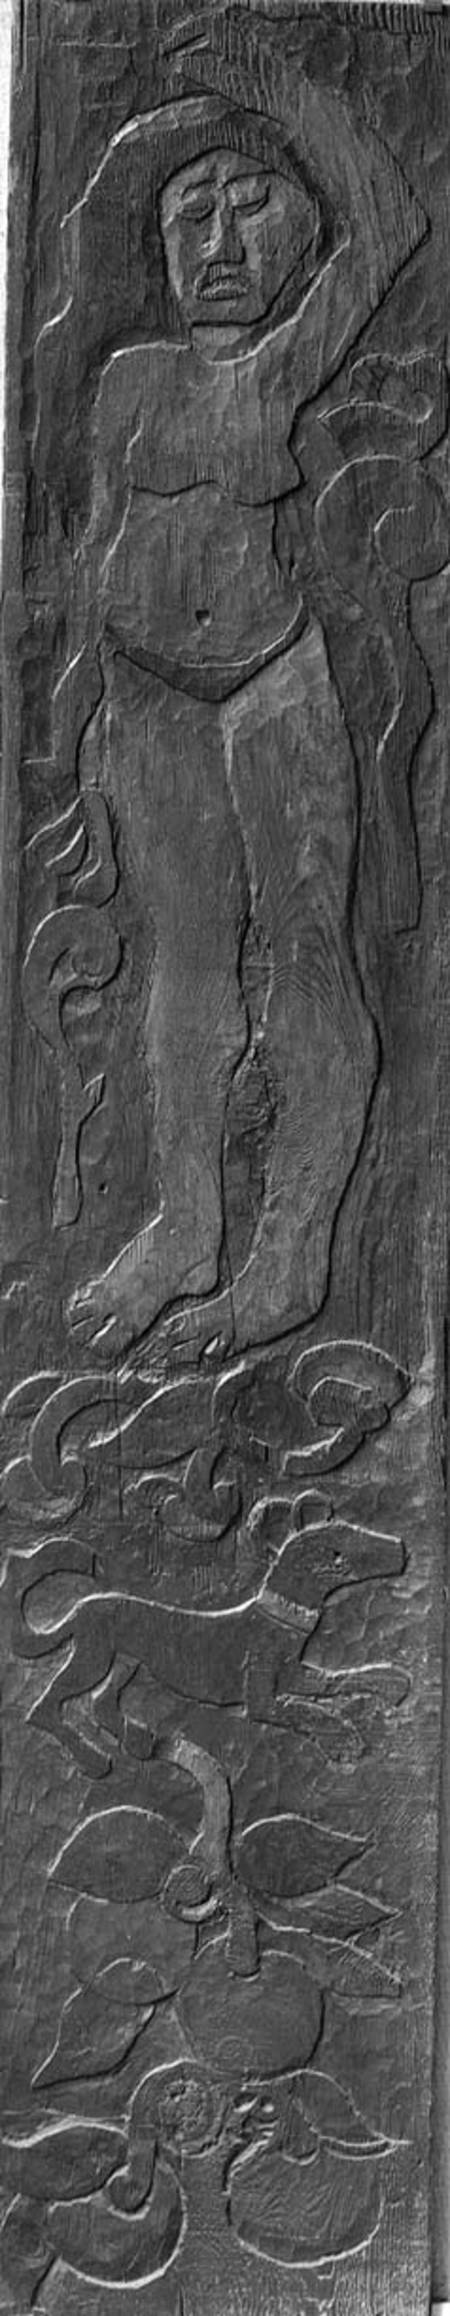 Carved vertical panel from the door frame of Gauguin's final residence in Atuona on Hiva Oa (Marques from Paul Gauguin